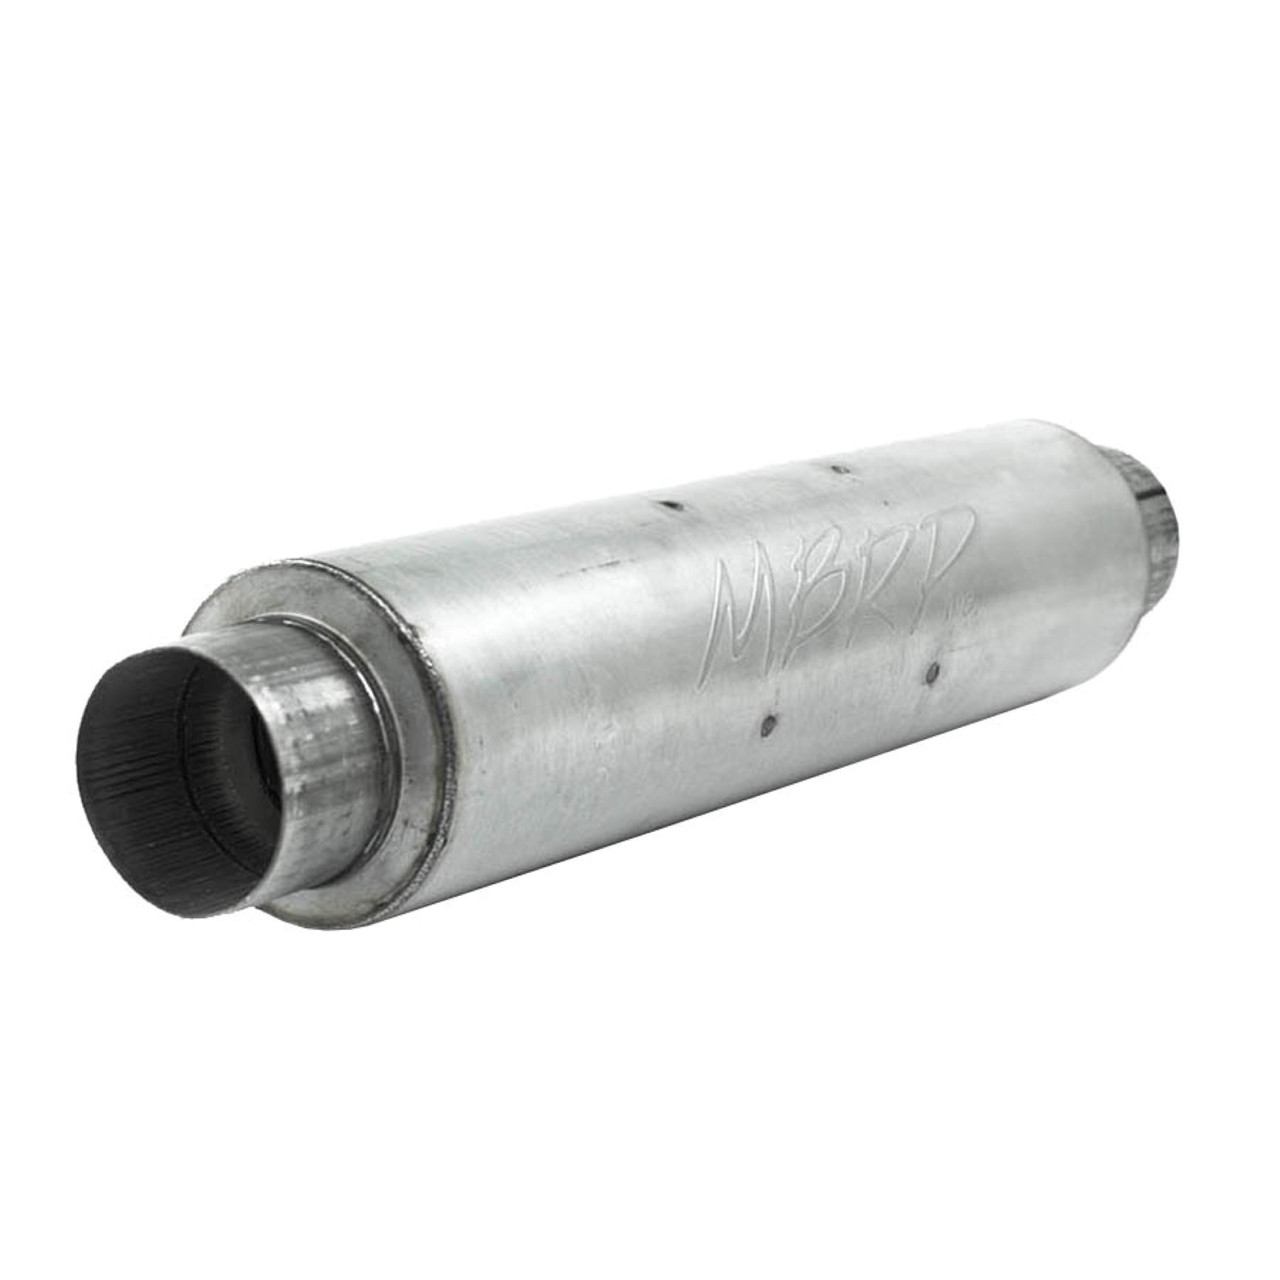 MBRP M1004A 4" Inlet Out Quiet Tone Exhaust Muffler 30" Overall Aluminized